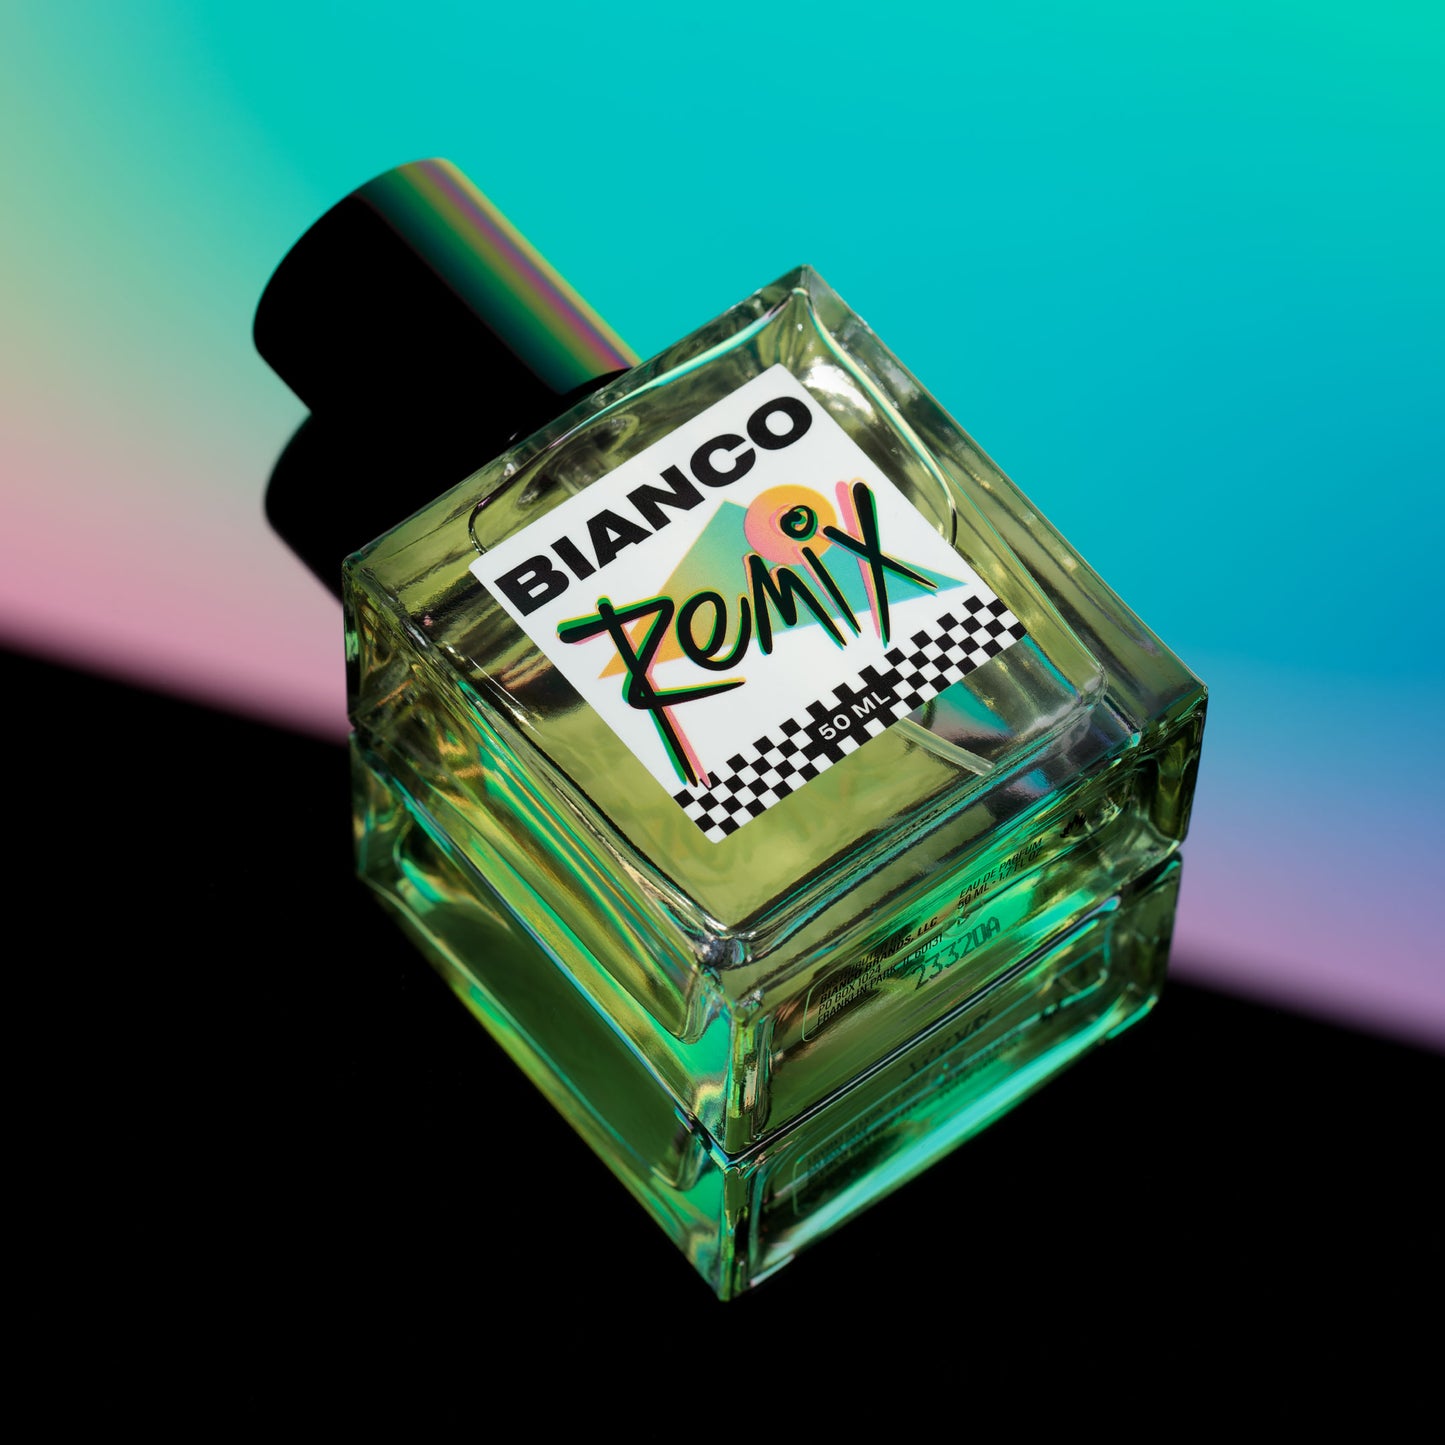 Bianco Profumo remix featuring notes of Vert de Bergamot Italy Orpur™, Vert de Mandarin Italy Orpur™, Lime Oil Ozone, Jasmine, Spearmint, Watery Melon Oakmoss, Amber, and Musk. Bottle laying down on a mirrored surface with a multicolored background. Aquatic citrus style fragrance.